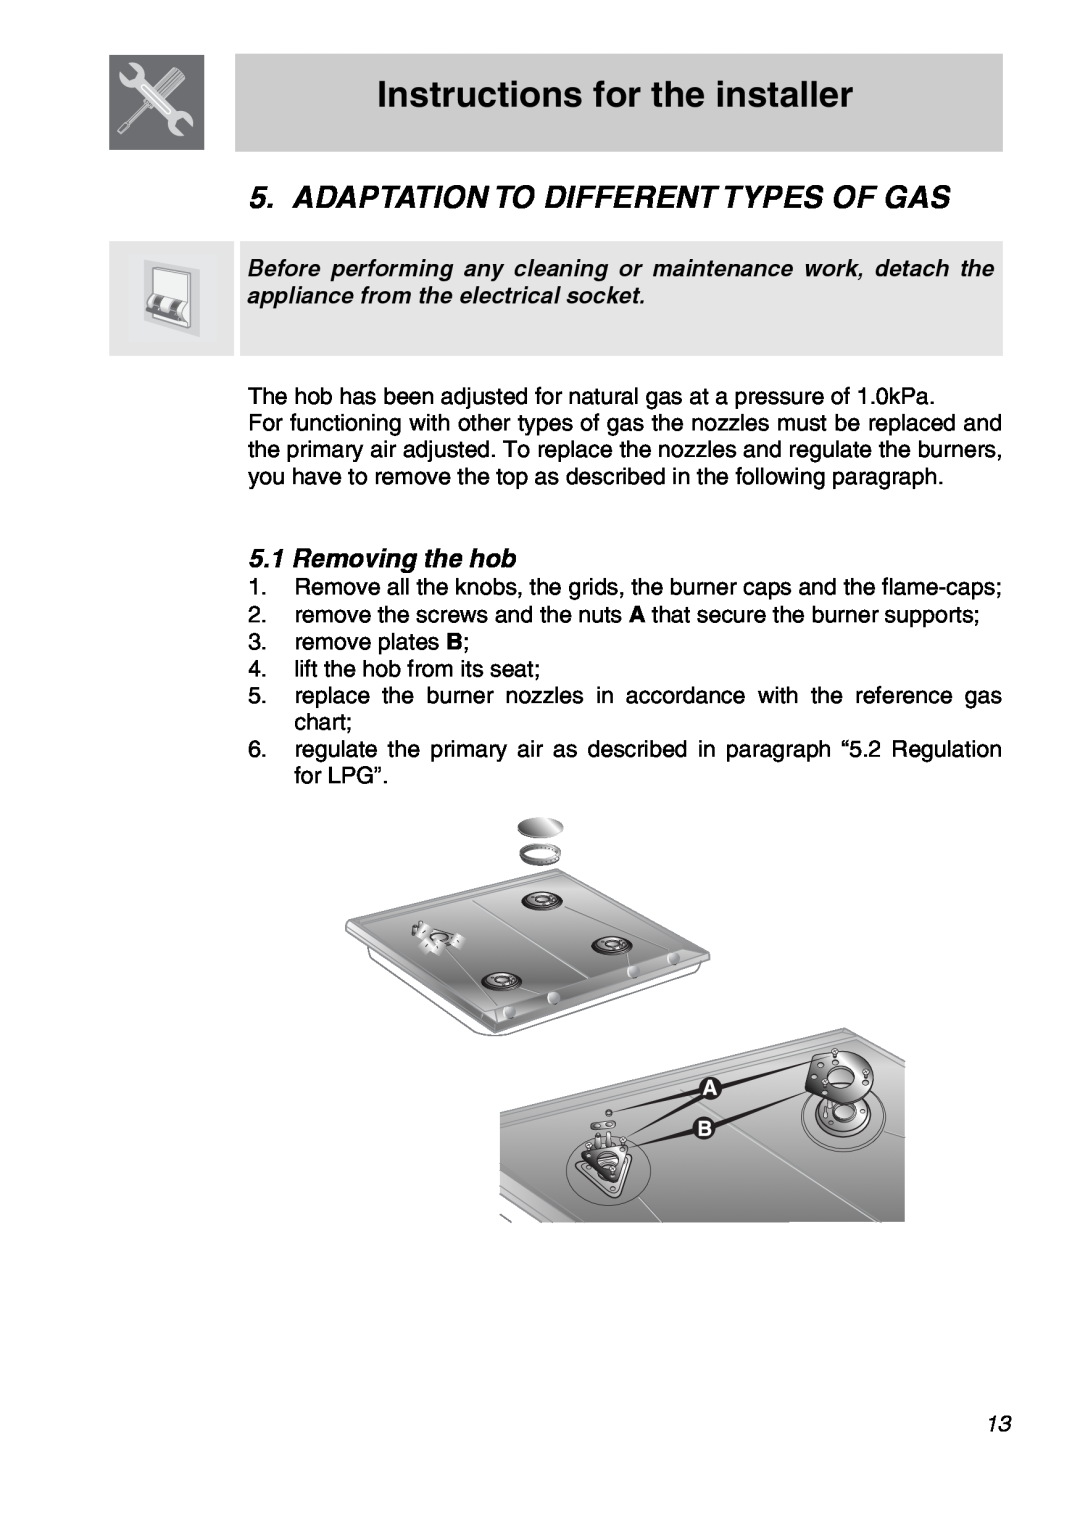 Smeg CIR597X5 manual Adaptation To Different Types Of Gas, Instructions for the installer, Removing the hob 